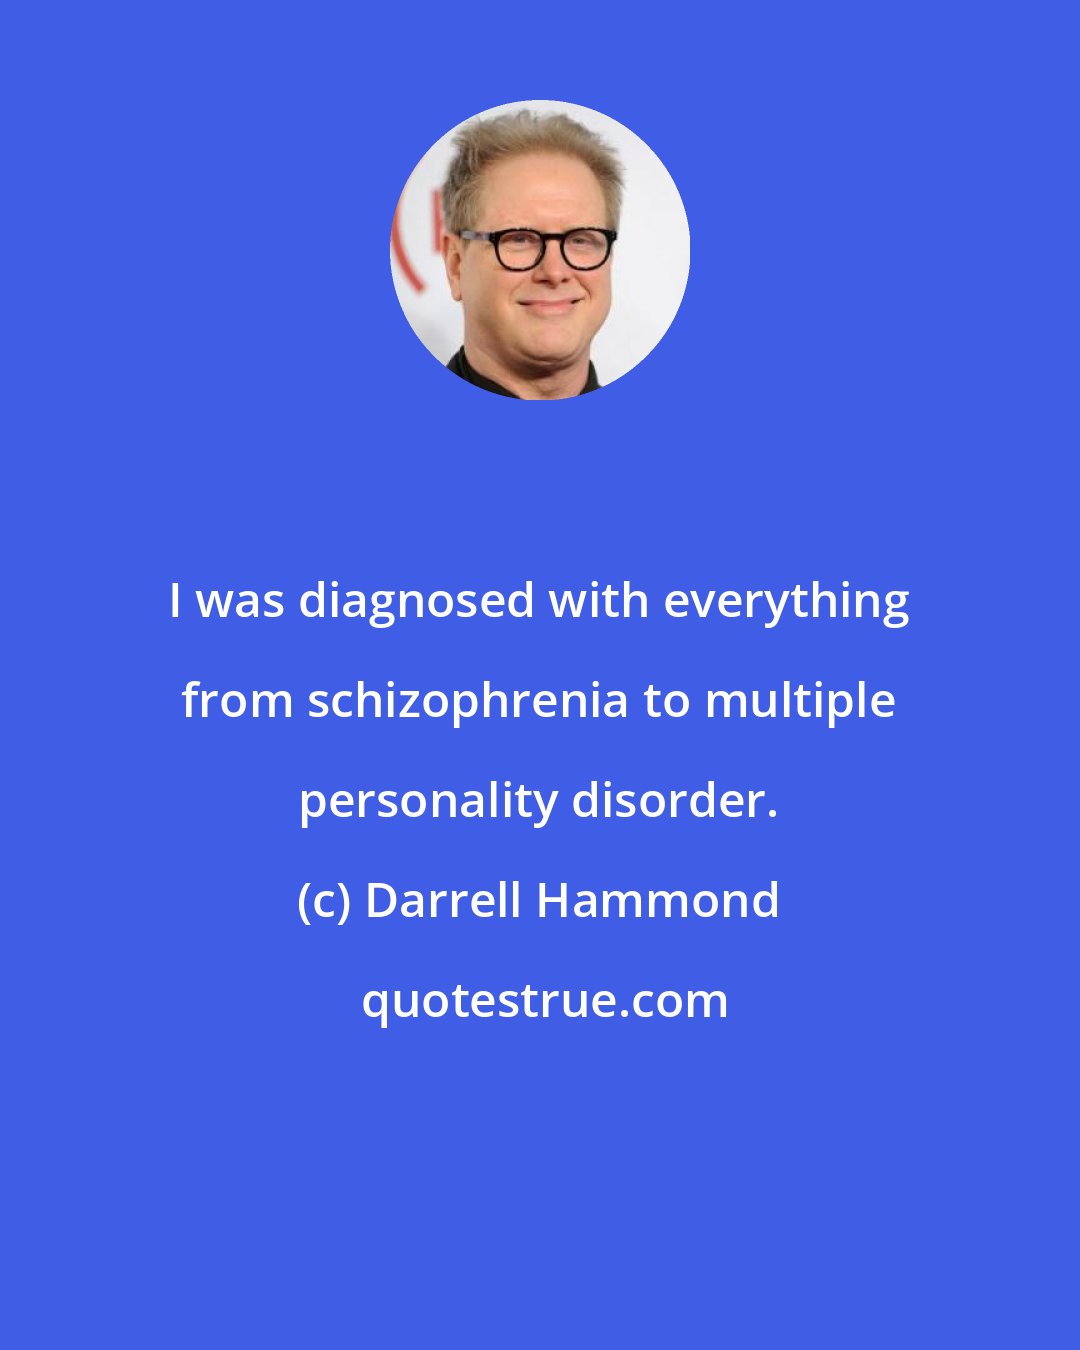 Darrell Hammond: I was diagnosed with everything from schizophrenia to multiple personality disorder.